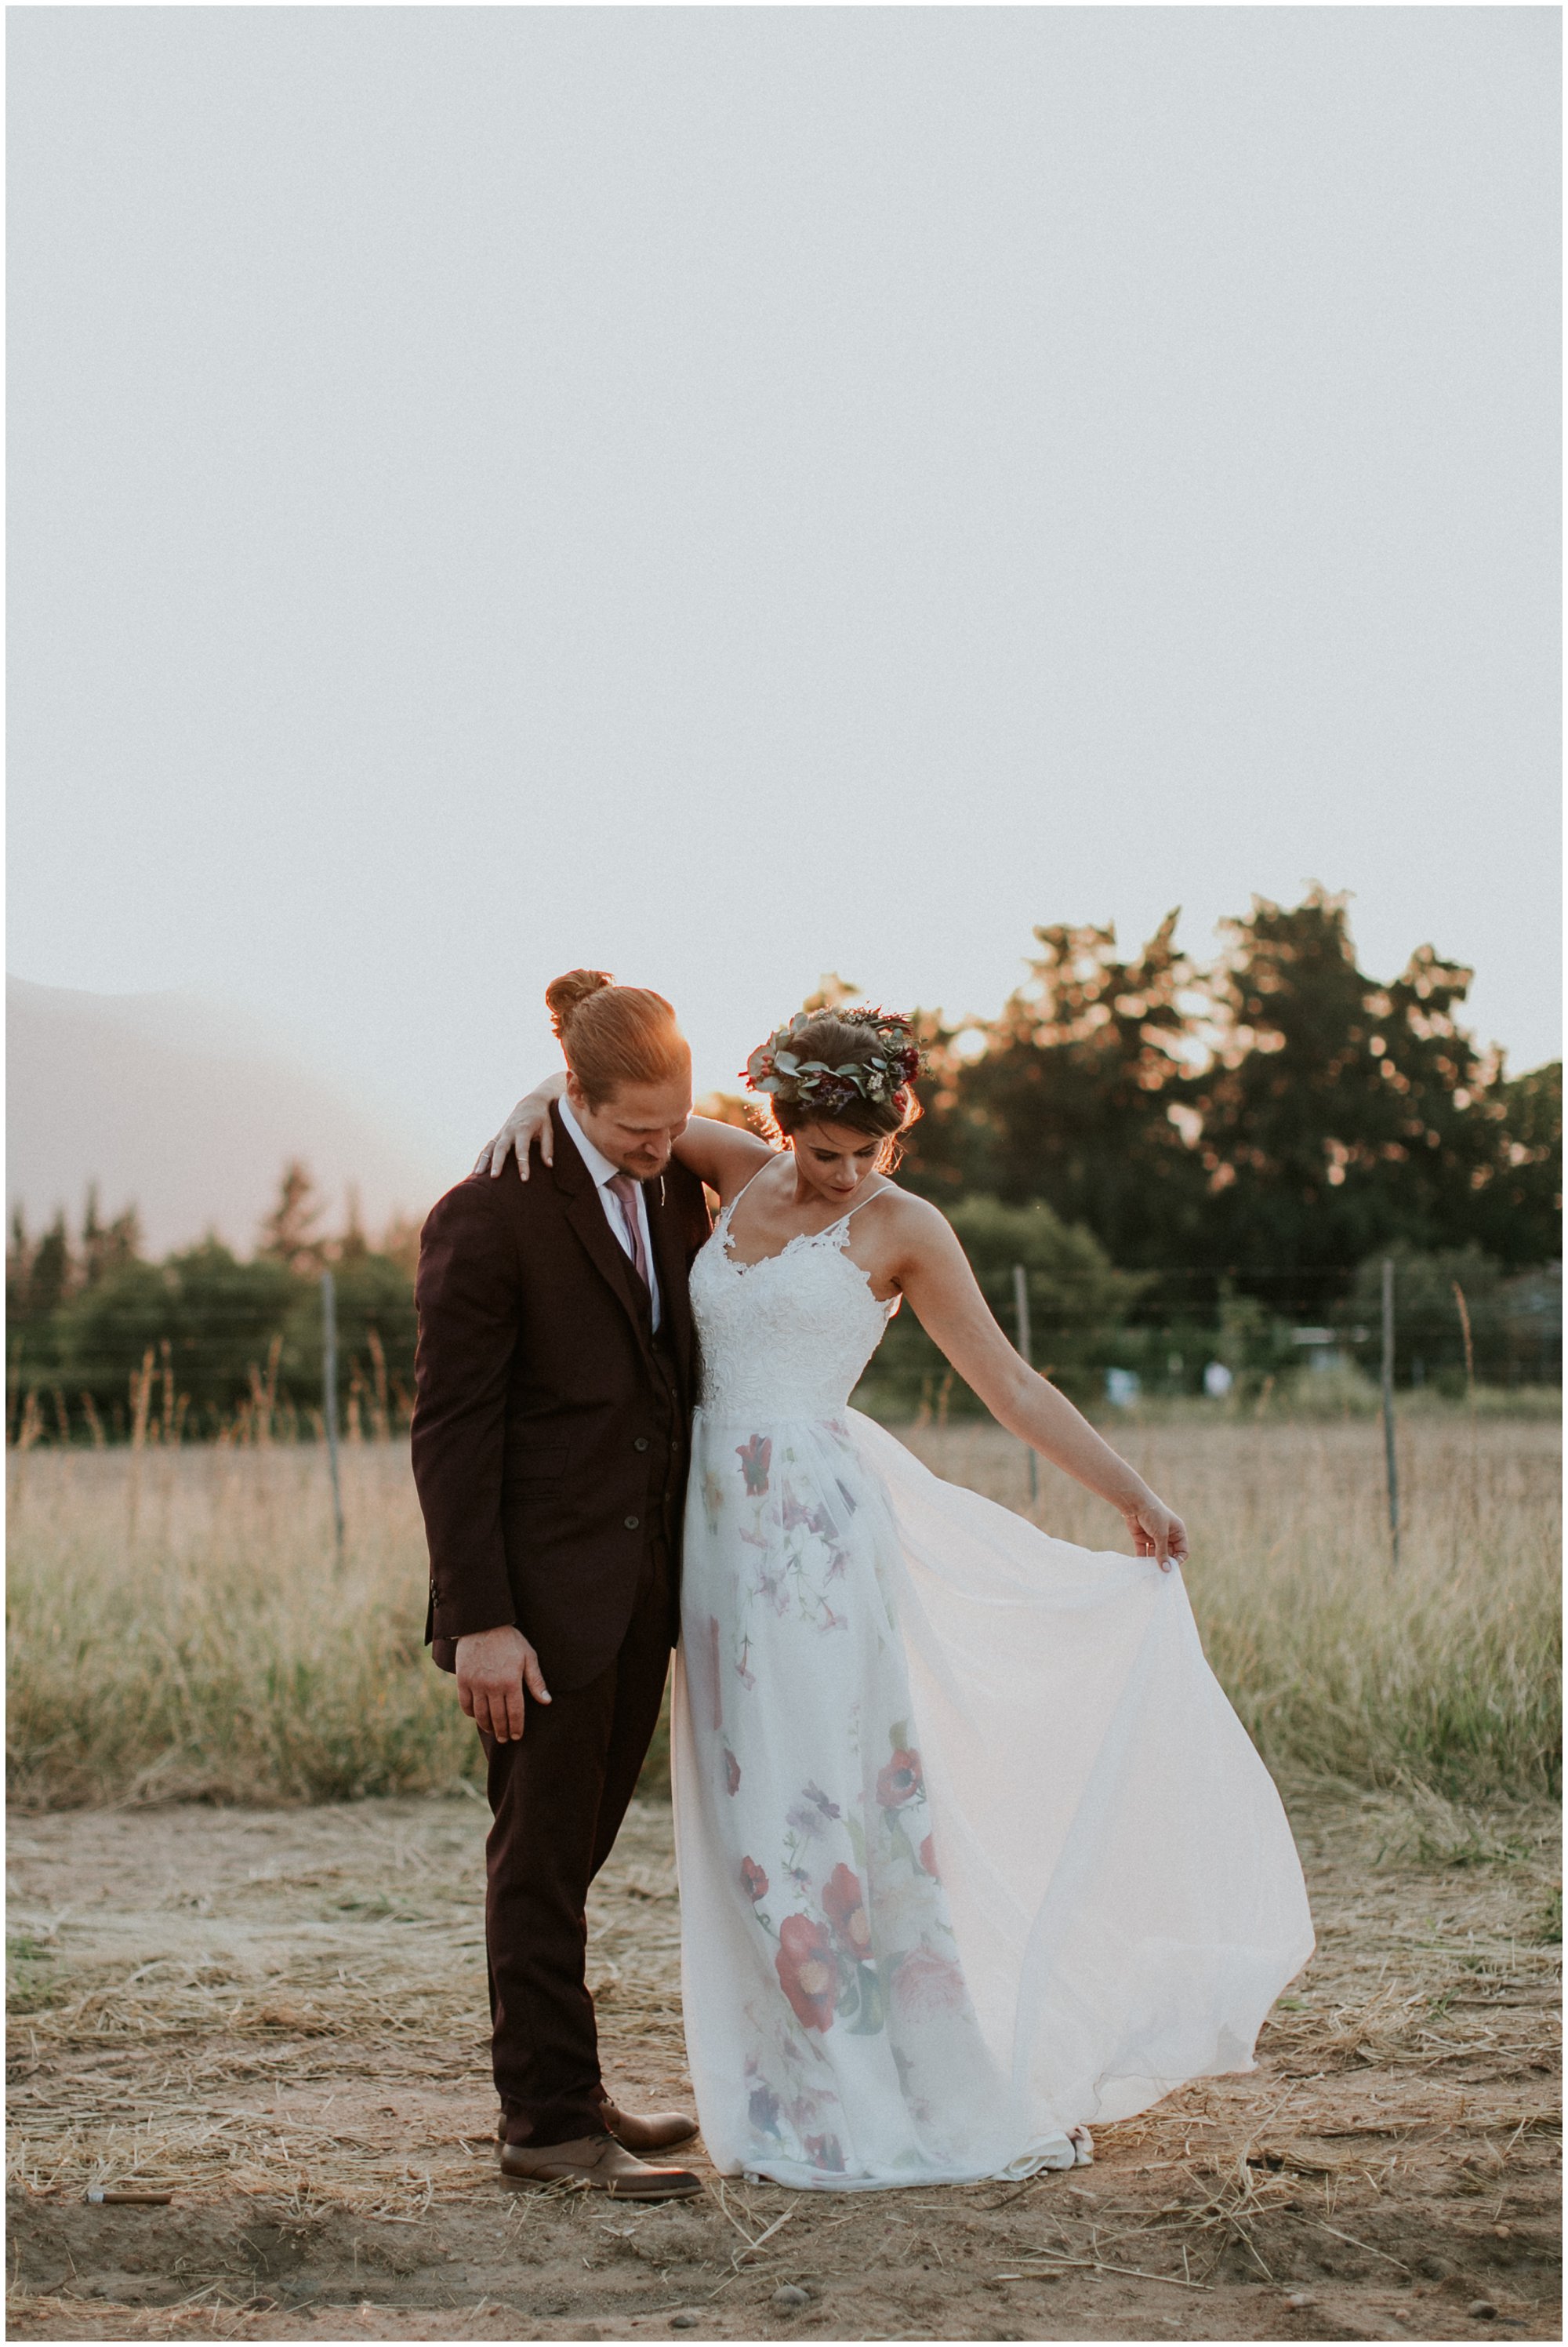 Romantic Sunset Couple Shoot at an Outdoor Bohemian Destination Wedding at Francine’s Venue in Hoedspruit Limpopo by Junebug World's Best Photographer Maryke Albertyn Award Winning International Alternative Moody Photography based in Cape Town South Africa